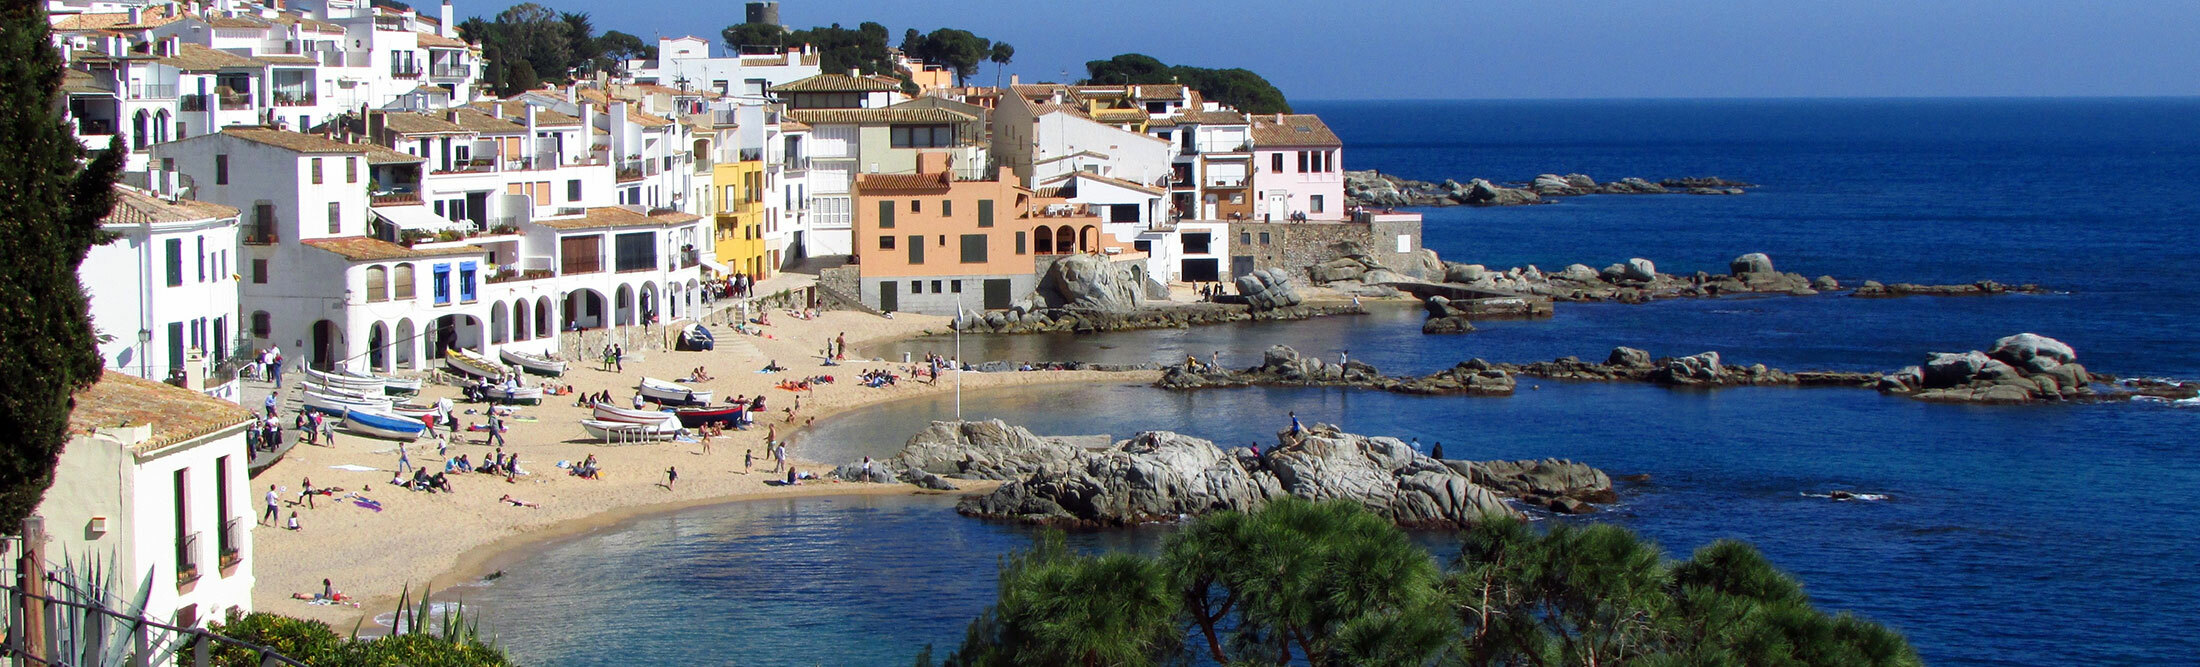 costa brava cover trips from barcelona tours days groups 1